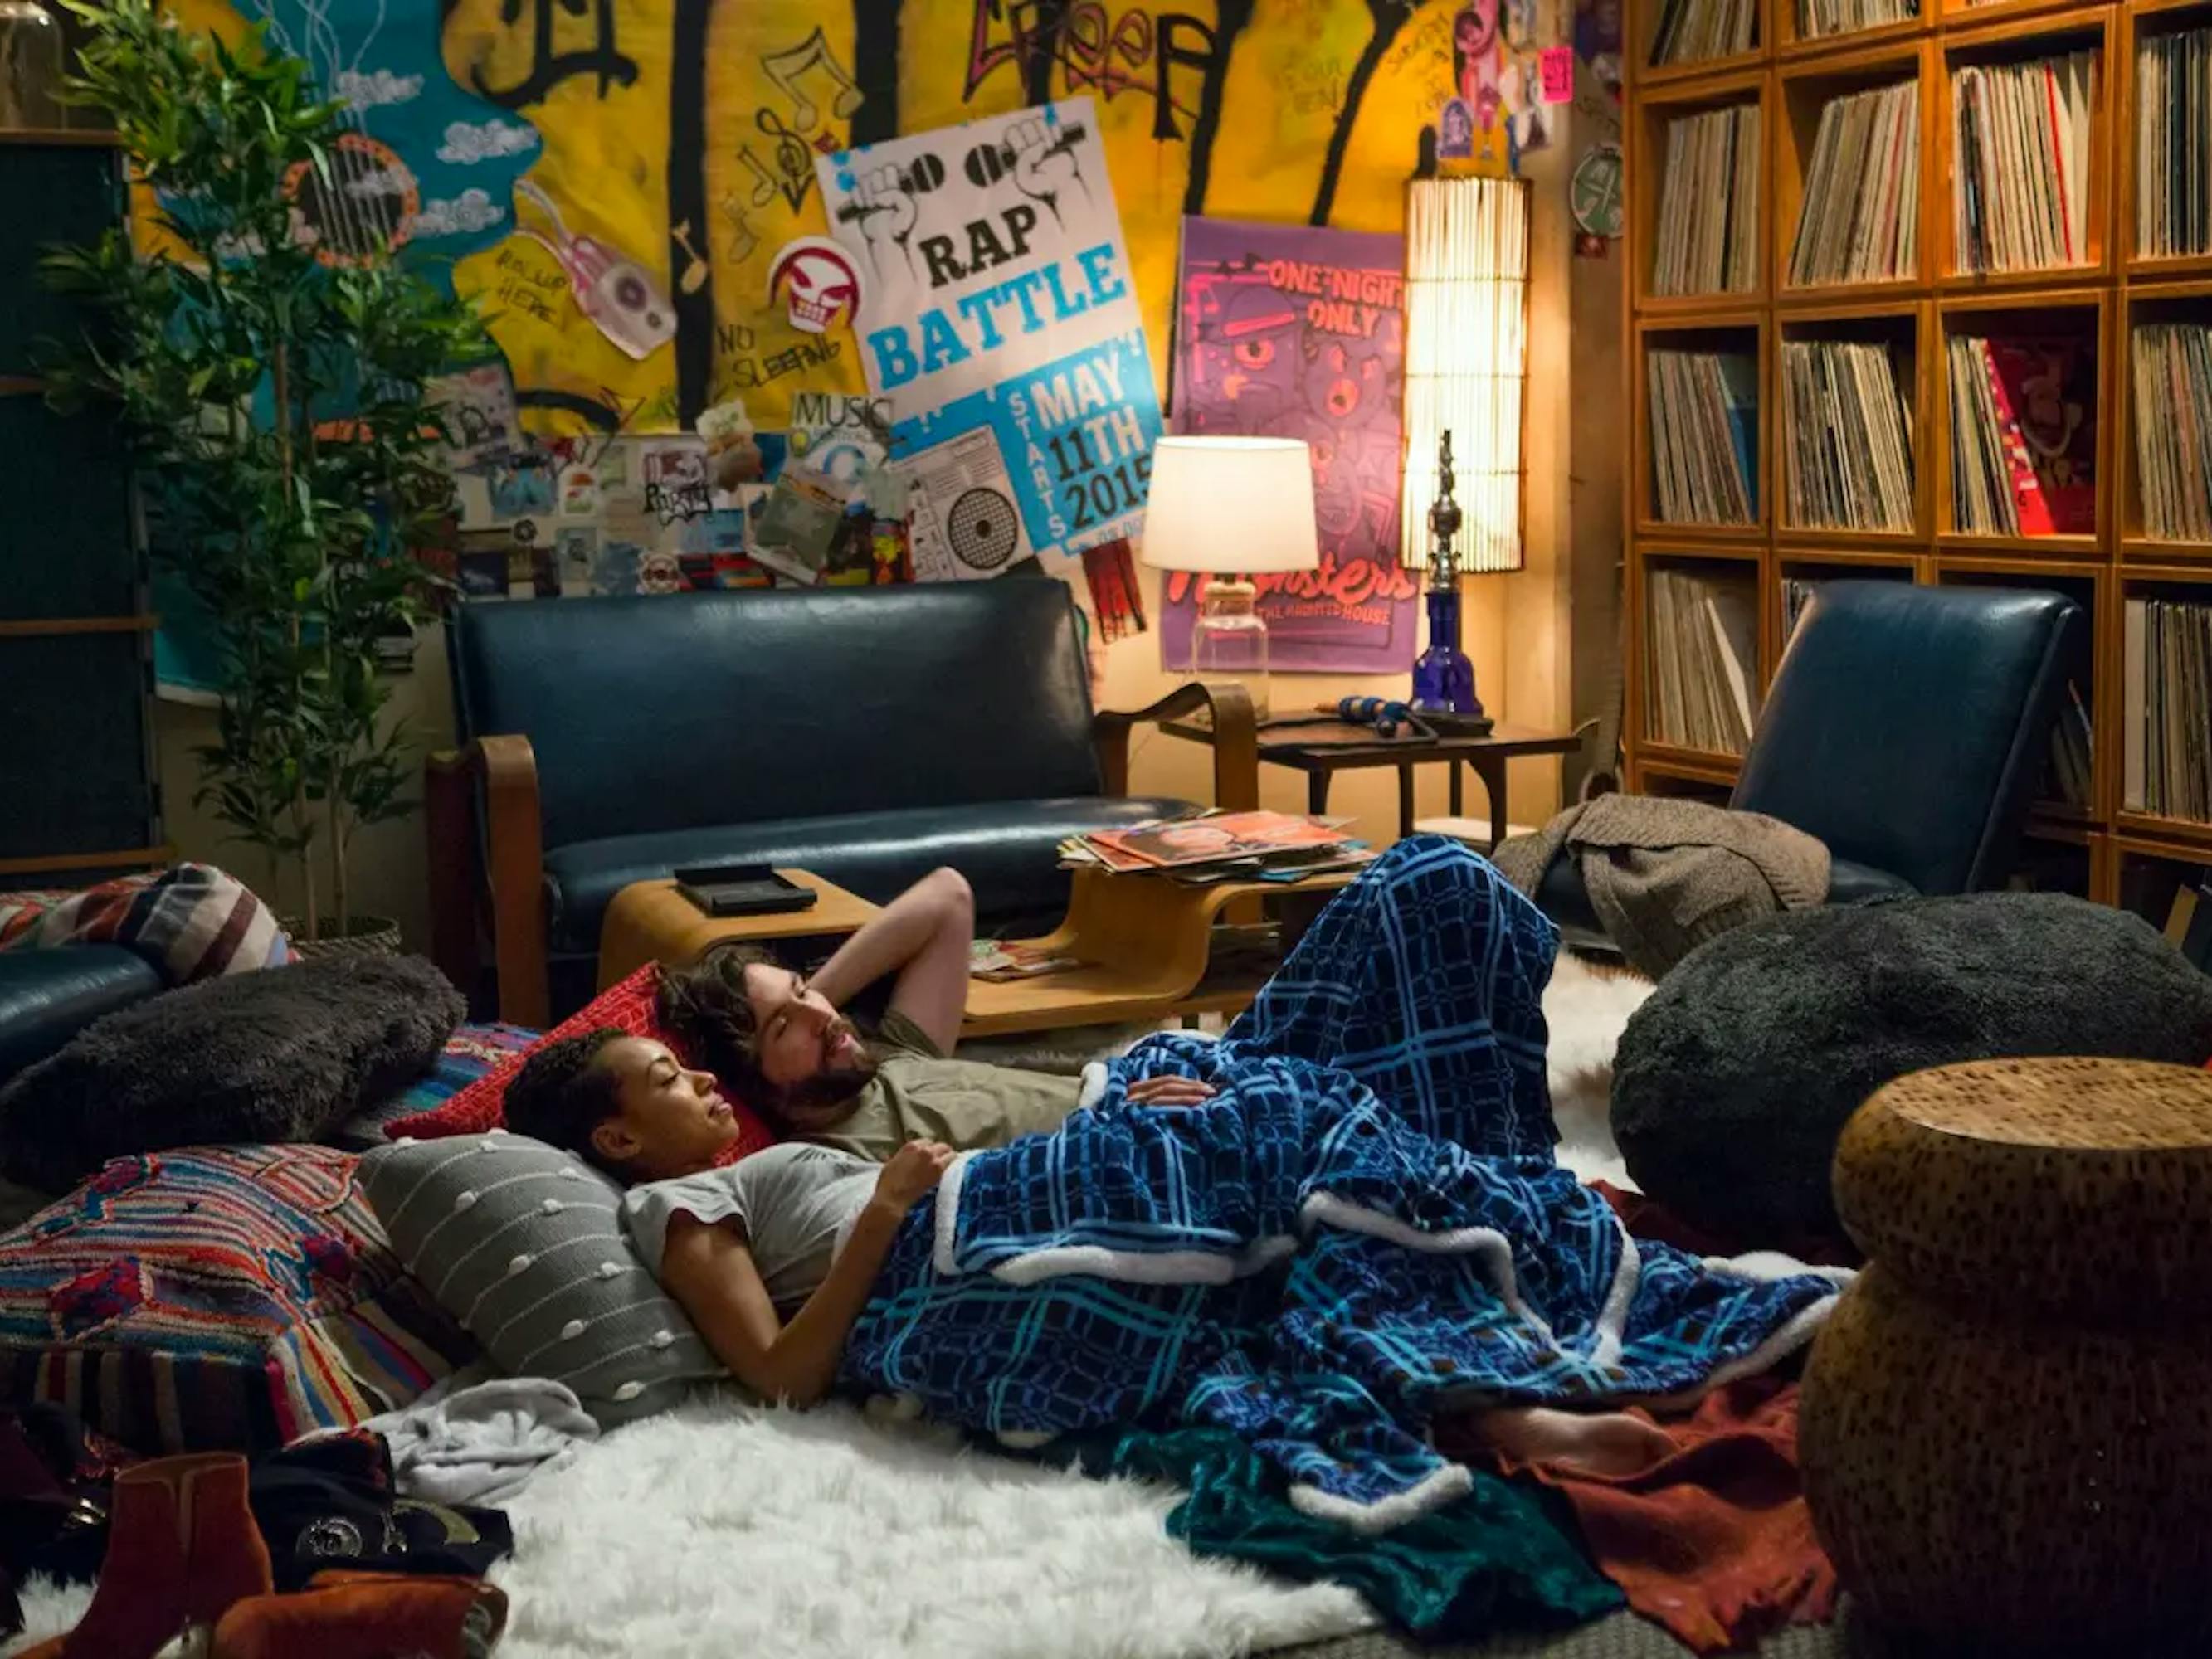 Sam White (Logan Browning) and Gabe Mitchell (John Patrick Amedori) lie on a plush white rug surrounded by chairs and pillows, and covered in a blue blanket. There are hundreds of records in shelves on the wall.